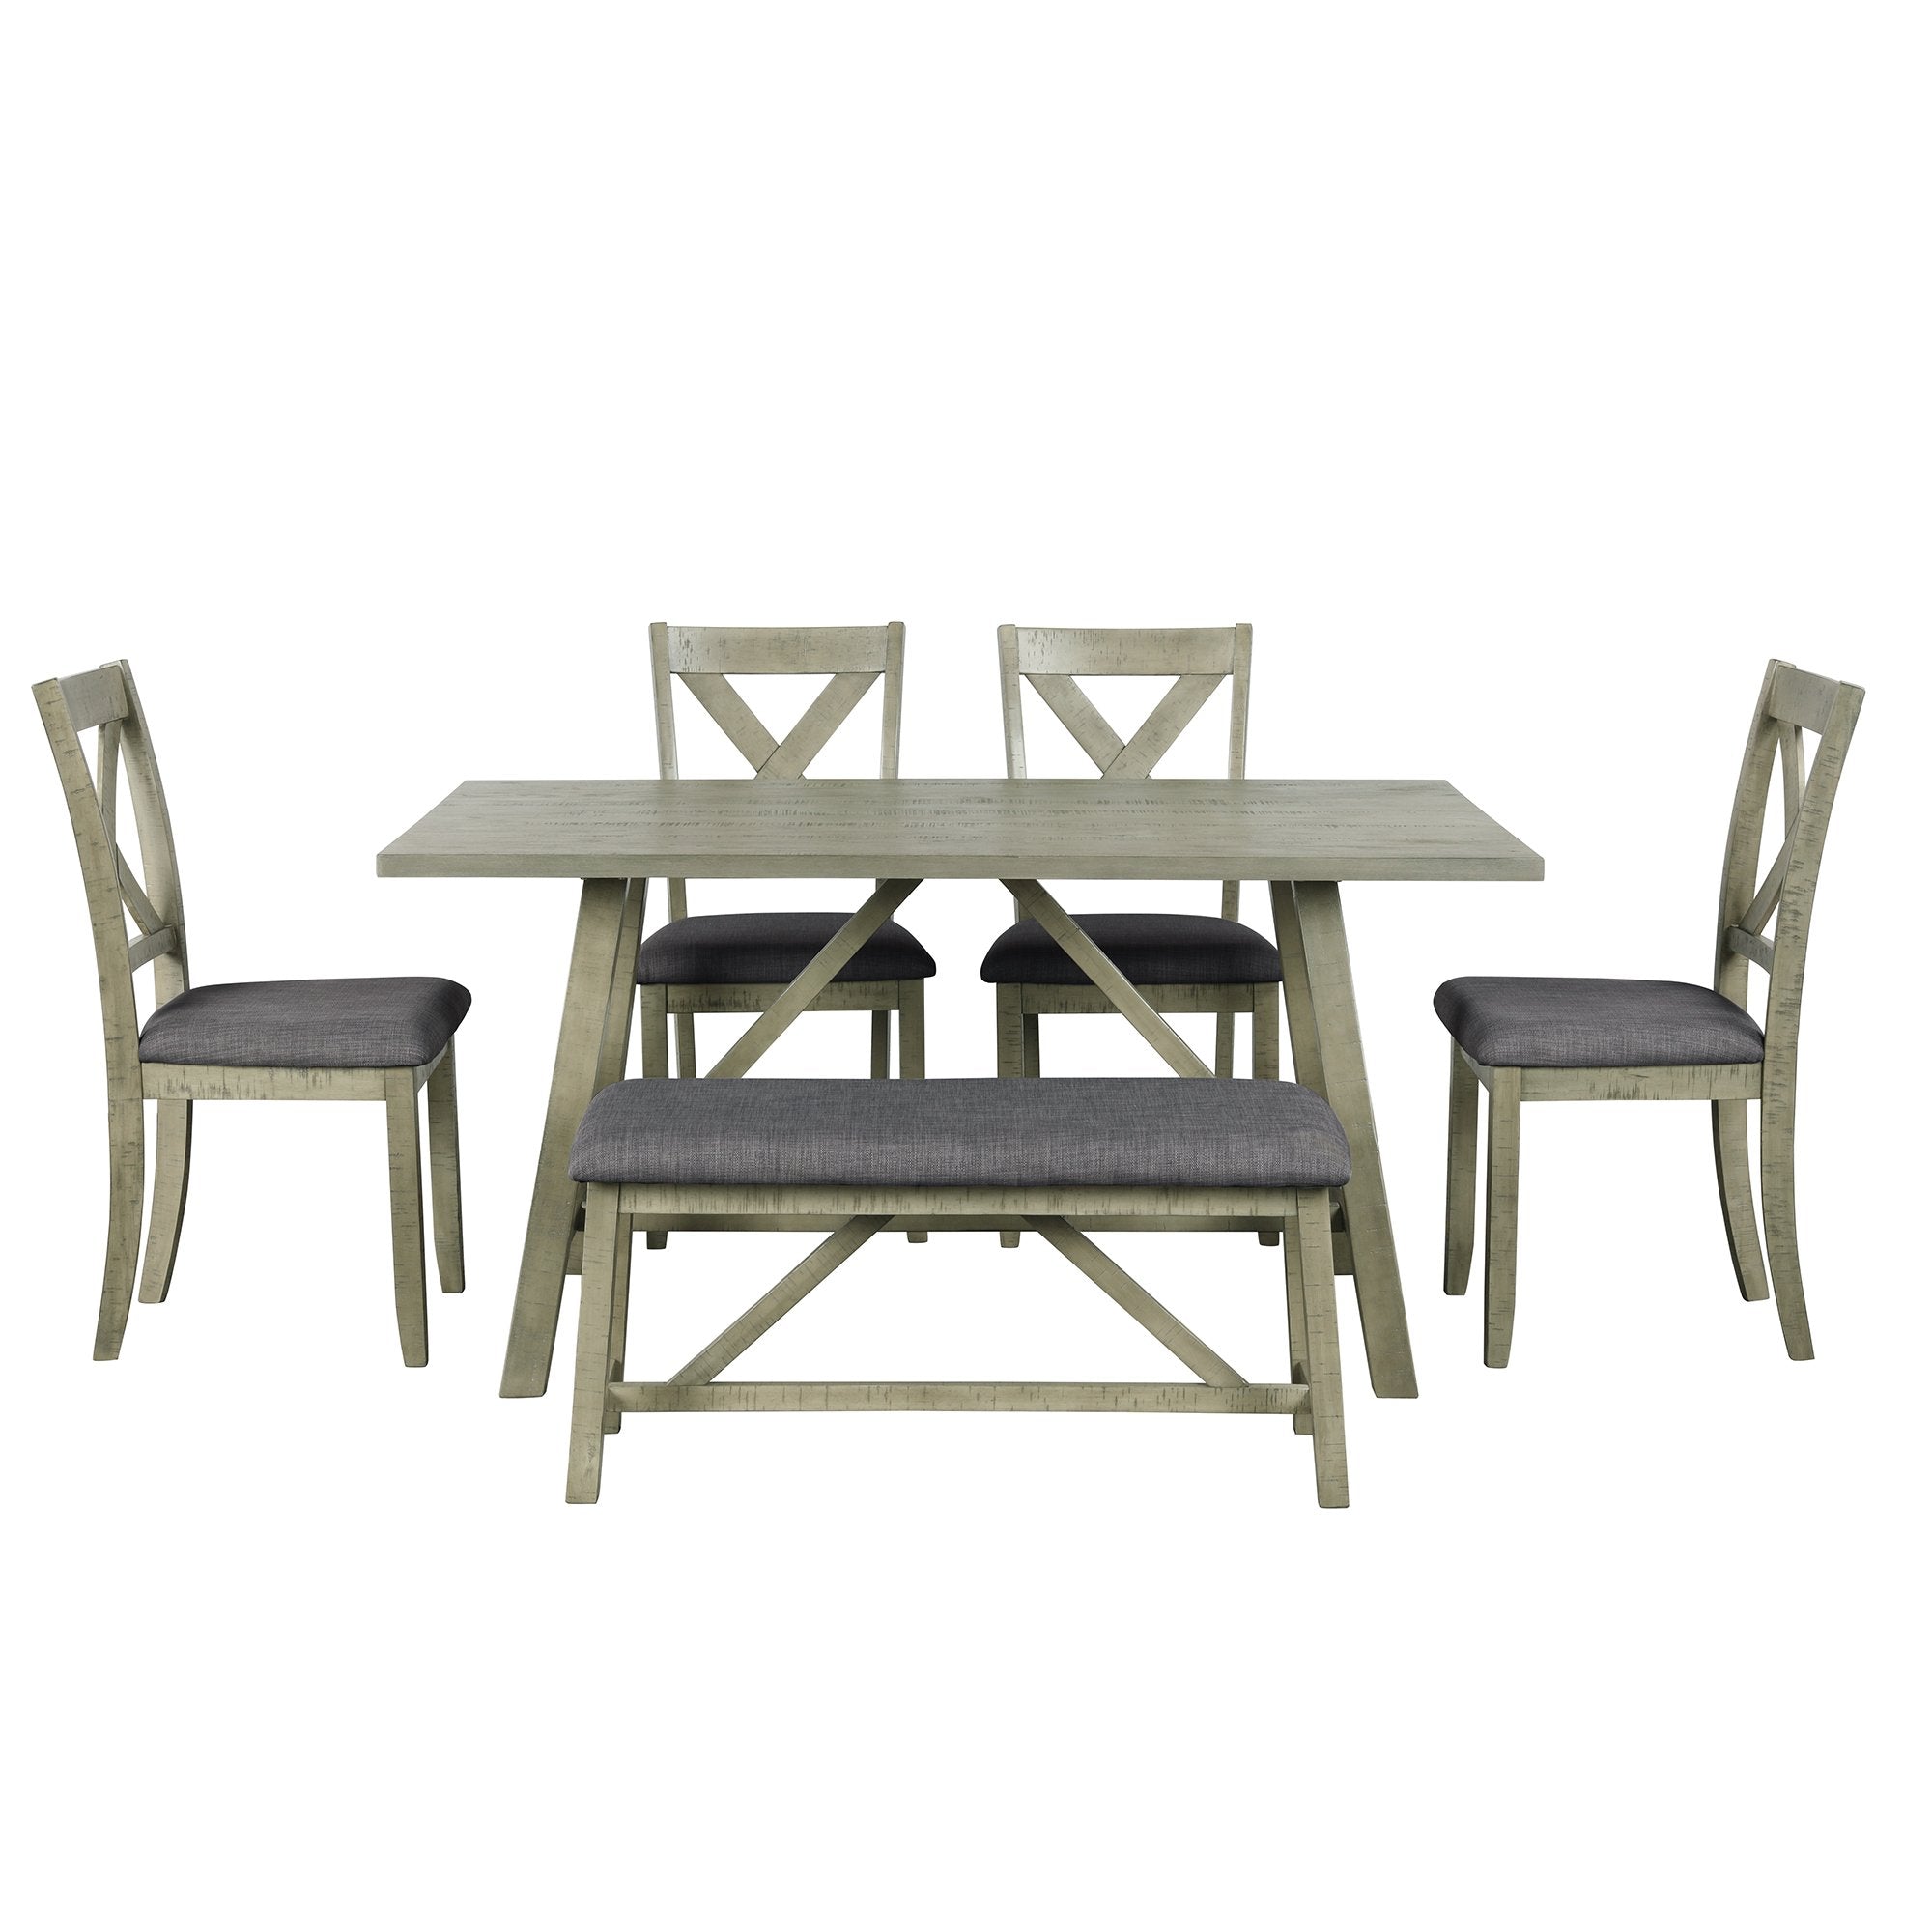 6 Piece Dining Table Set Wood Dining Table and chair Kitchen Table Set with Table, Bench and 4 Chairs, Rustic Style, Gray-Boyel Living